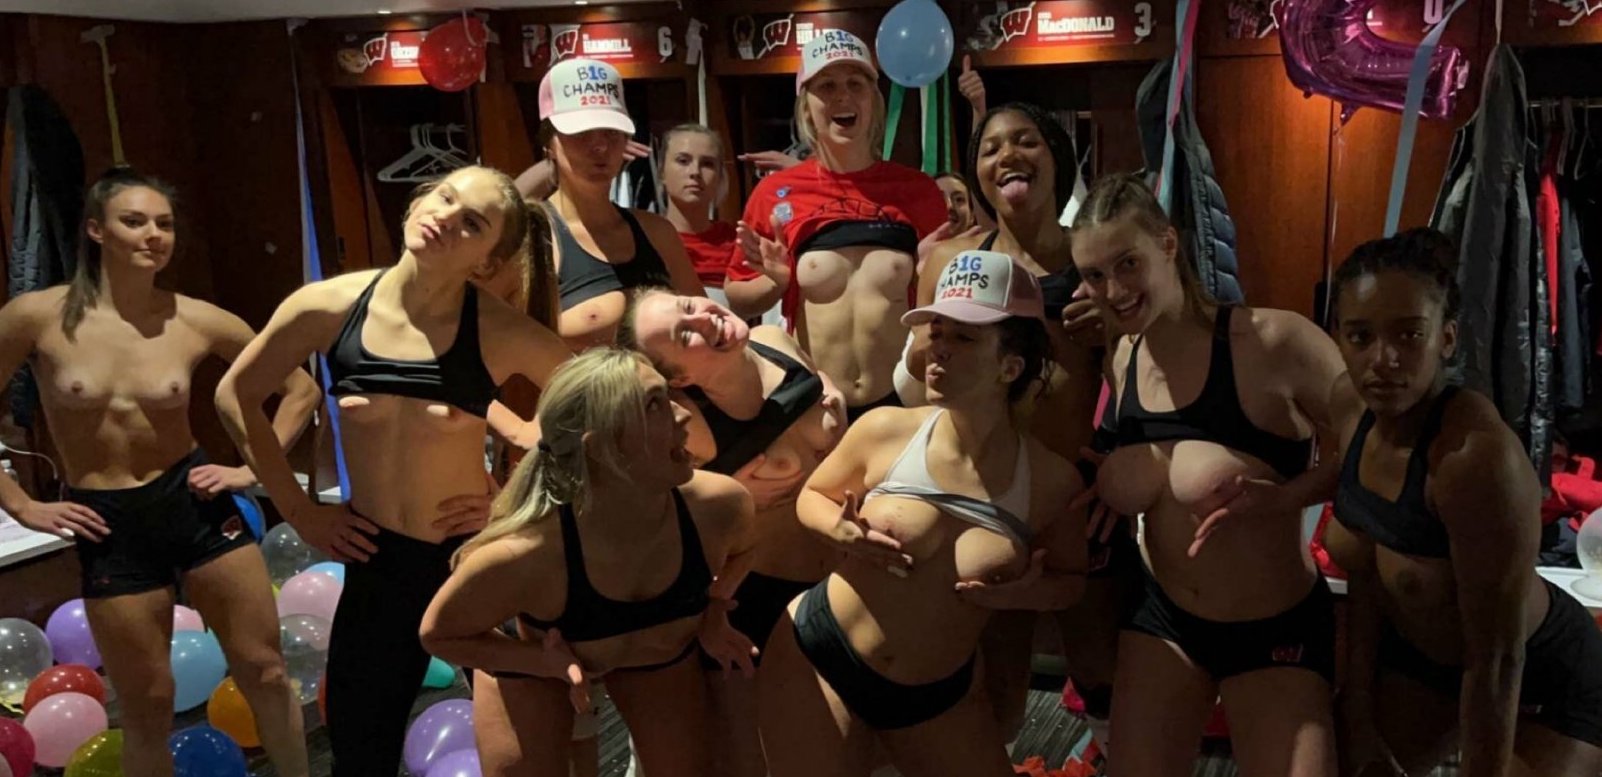 University of Wisconsin Vollyball Champion Titty Flashers of the Day